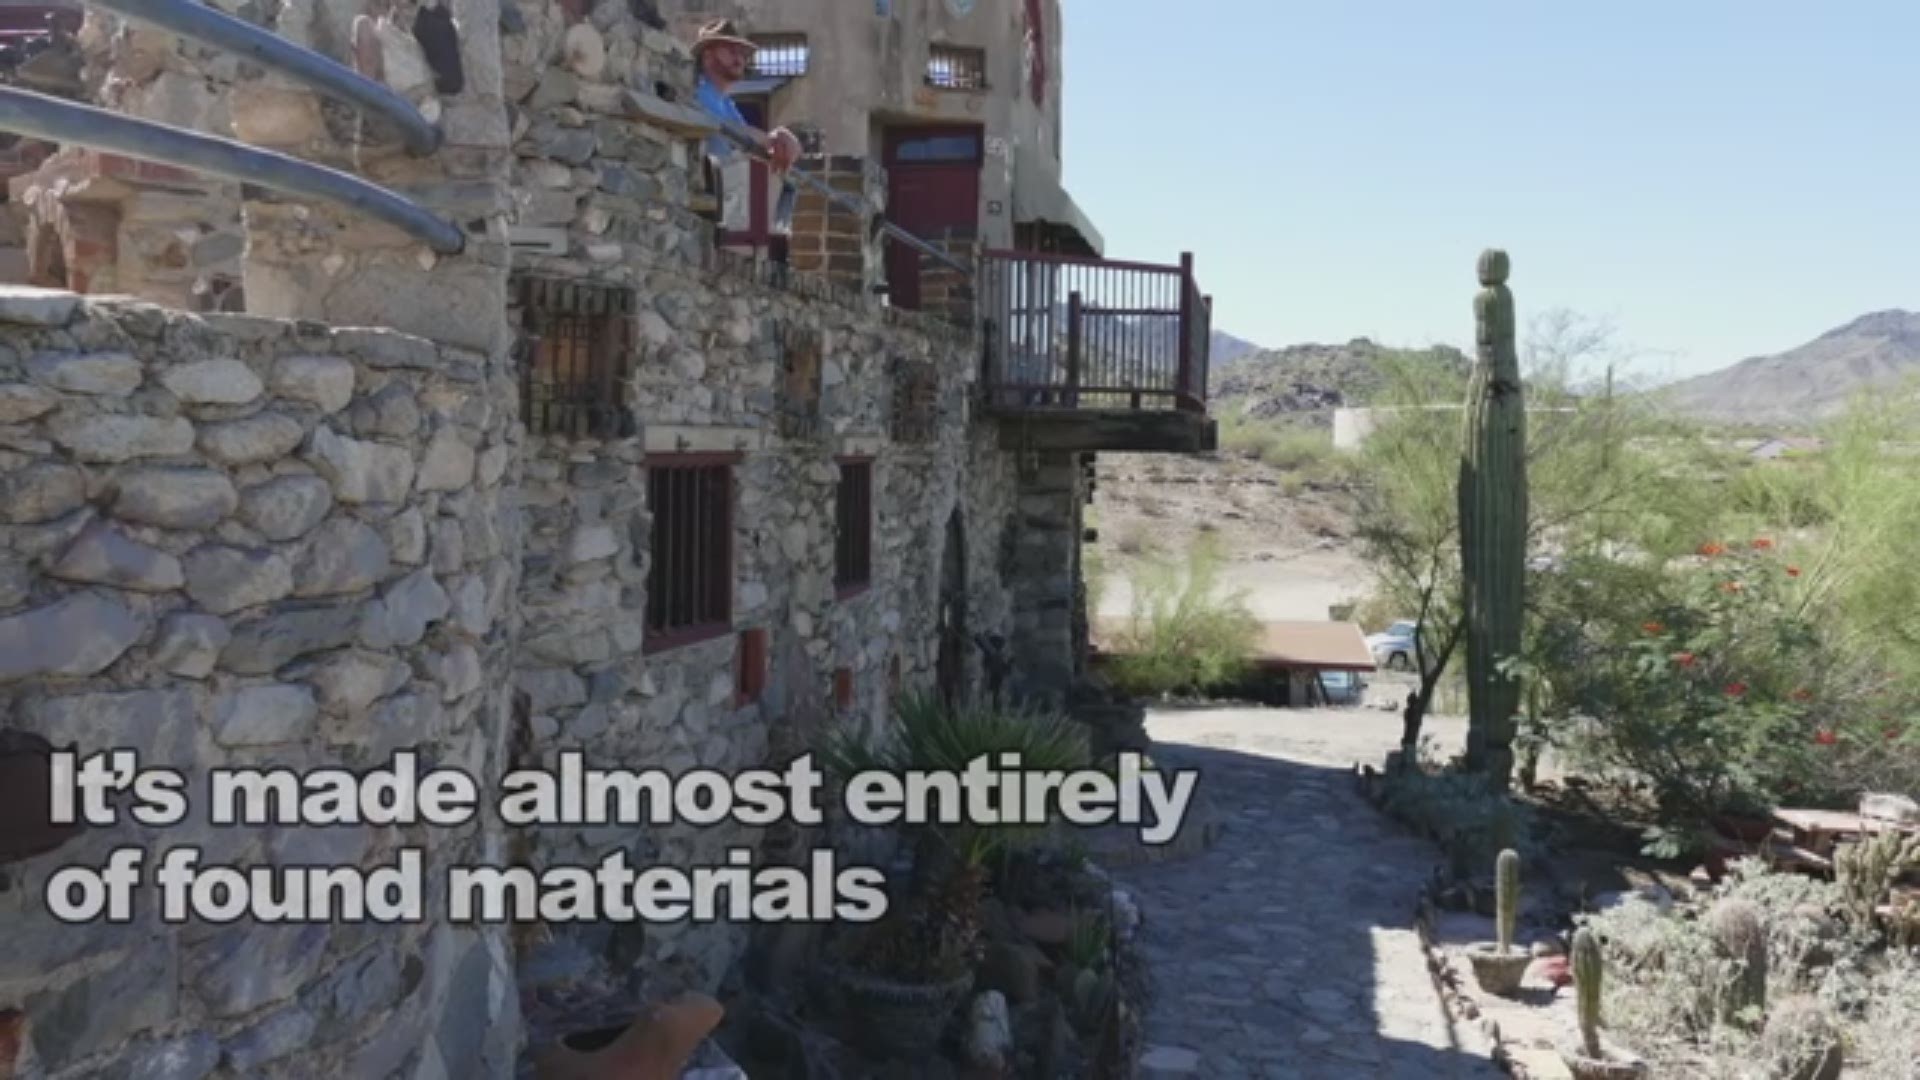 The beautiful 18-room home is full of stories and just minutes from downtown Phoenix.